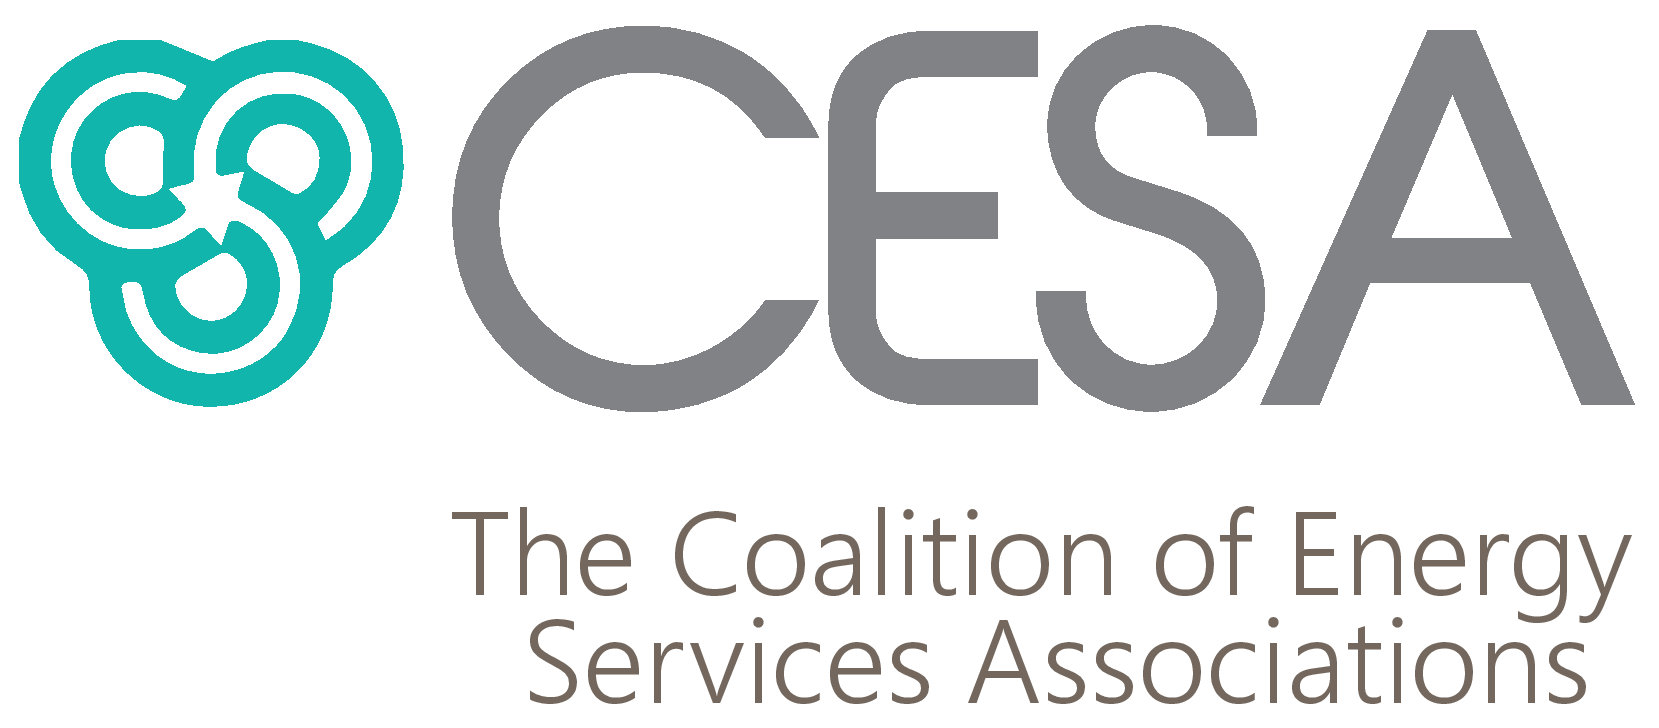 The Coalition of Energy Services Associations (CESA)